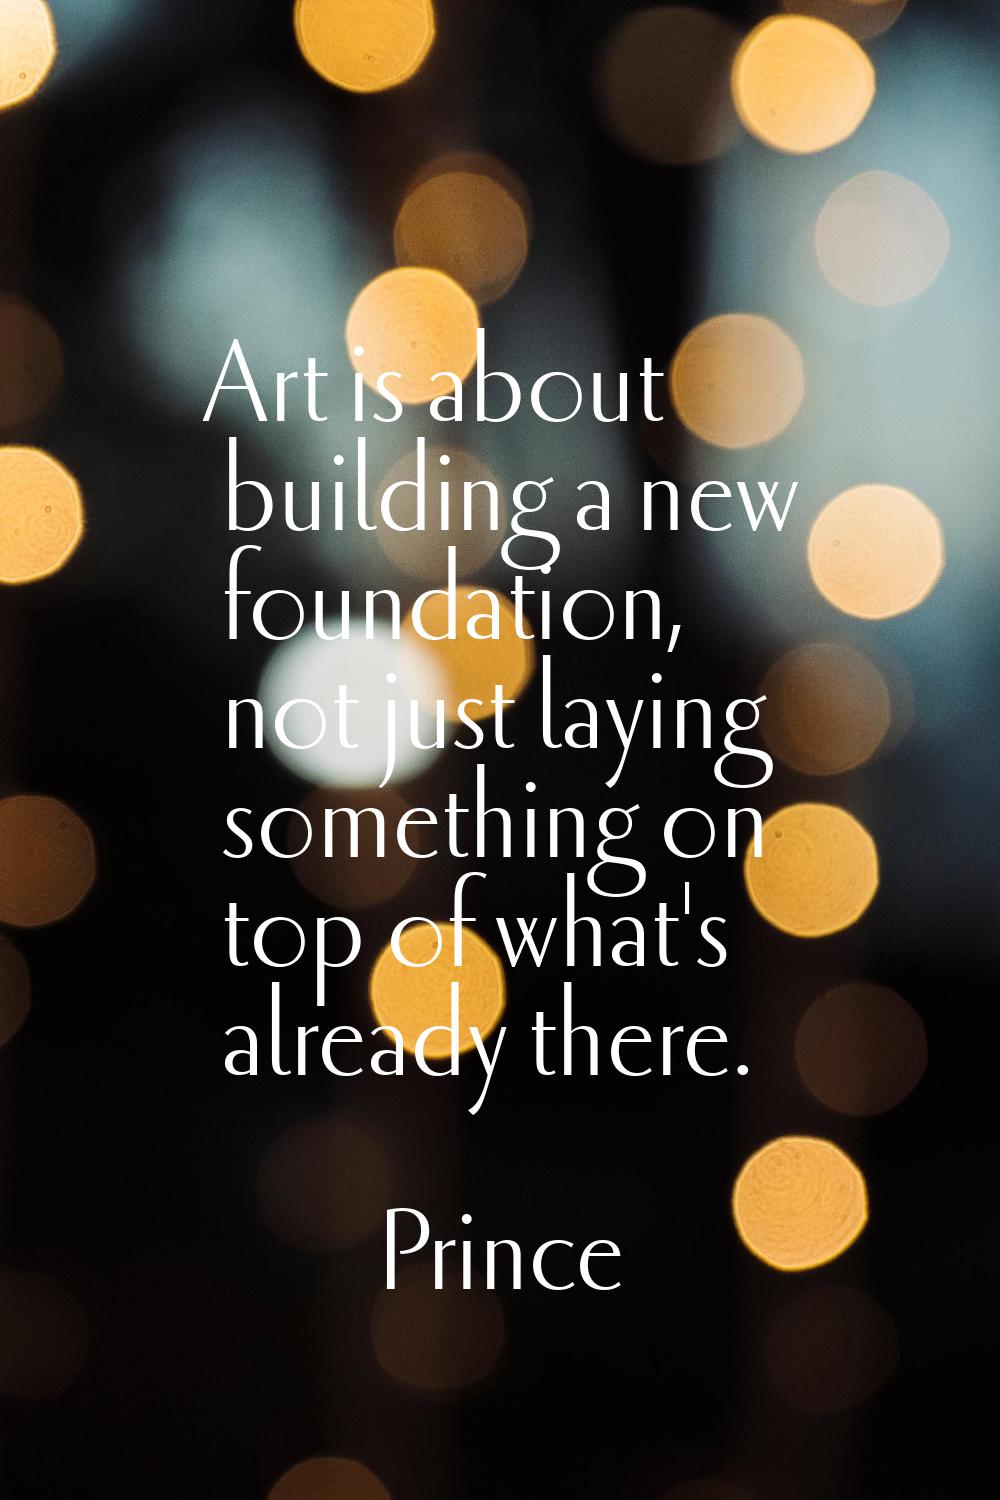 Art is about building a new foundation, not just laying something on top of what's already there.